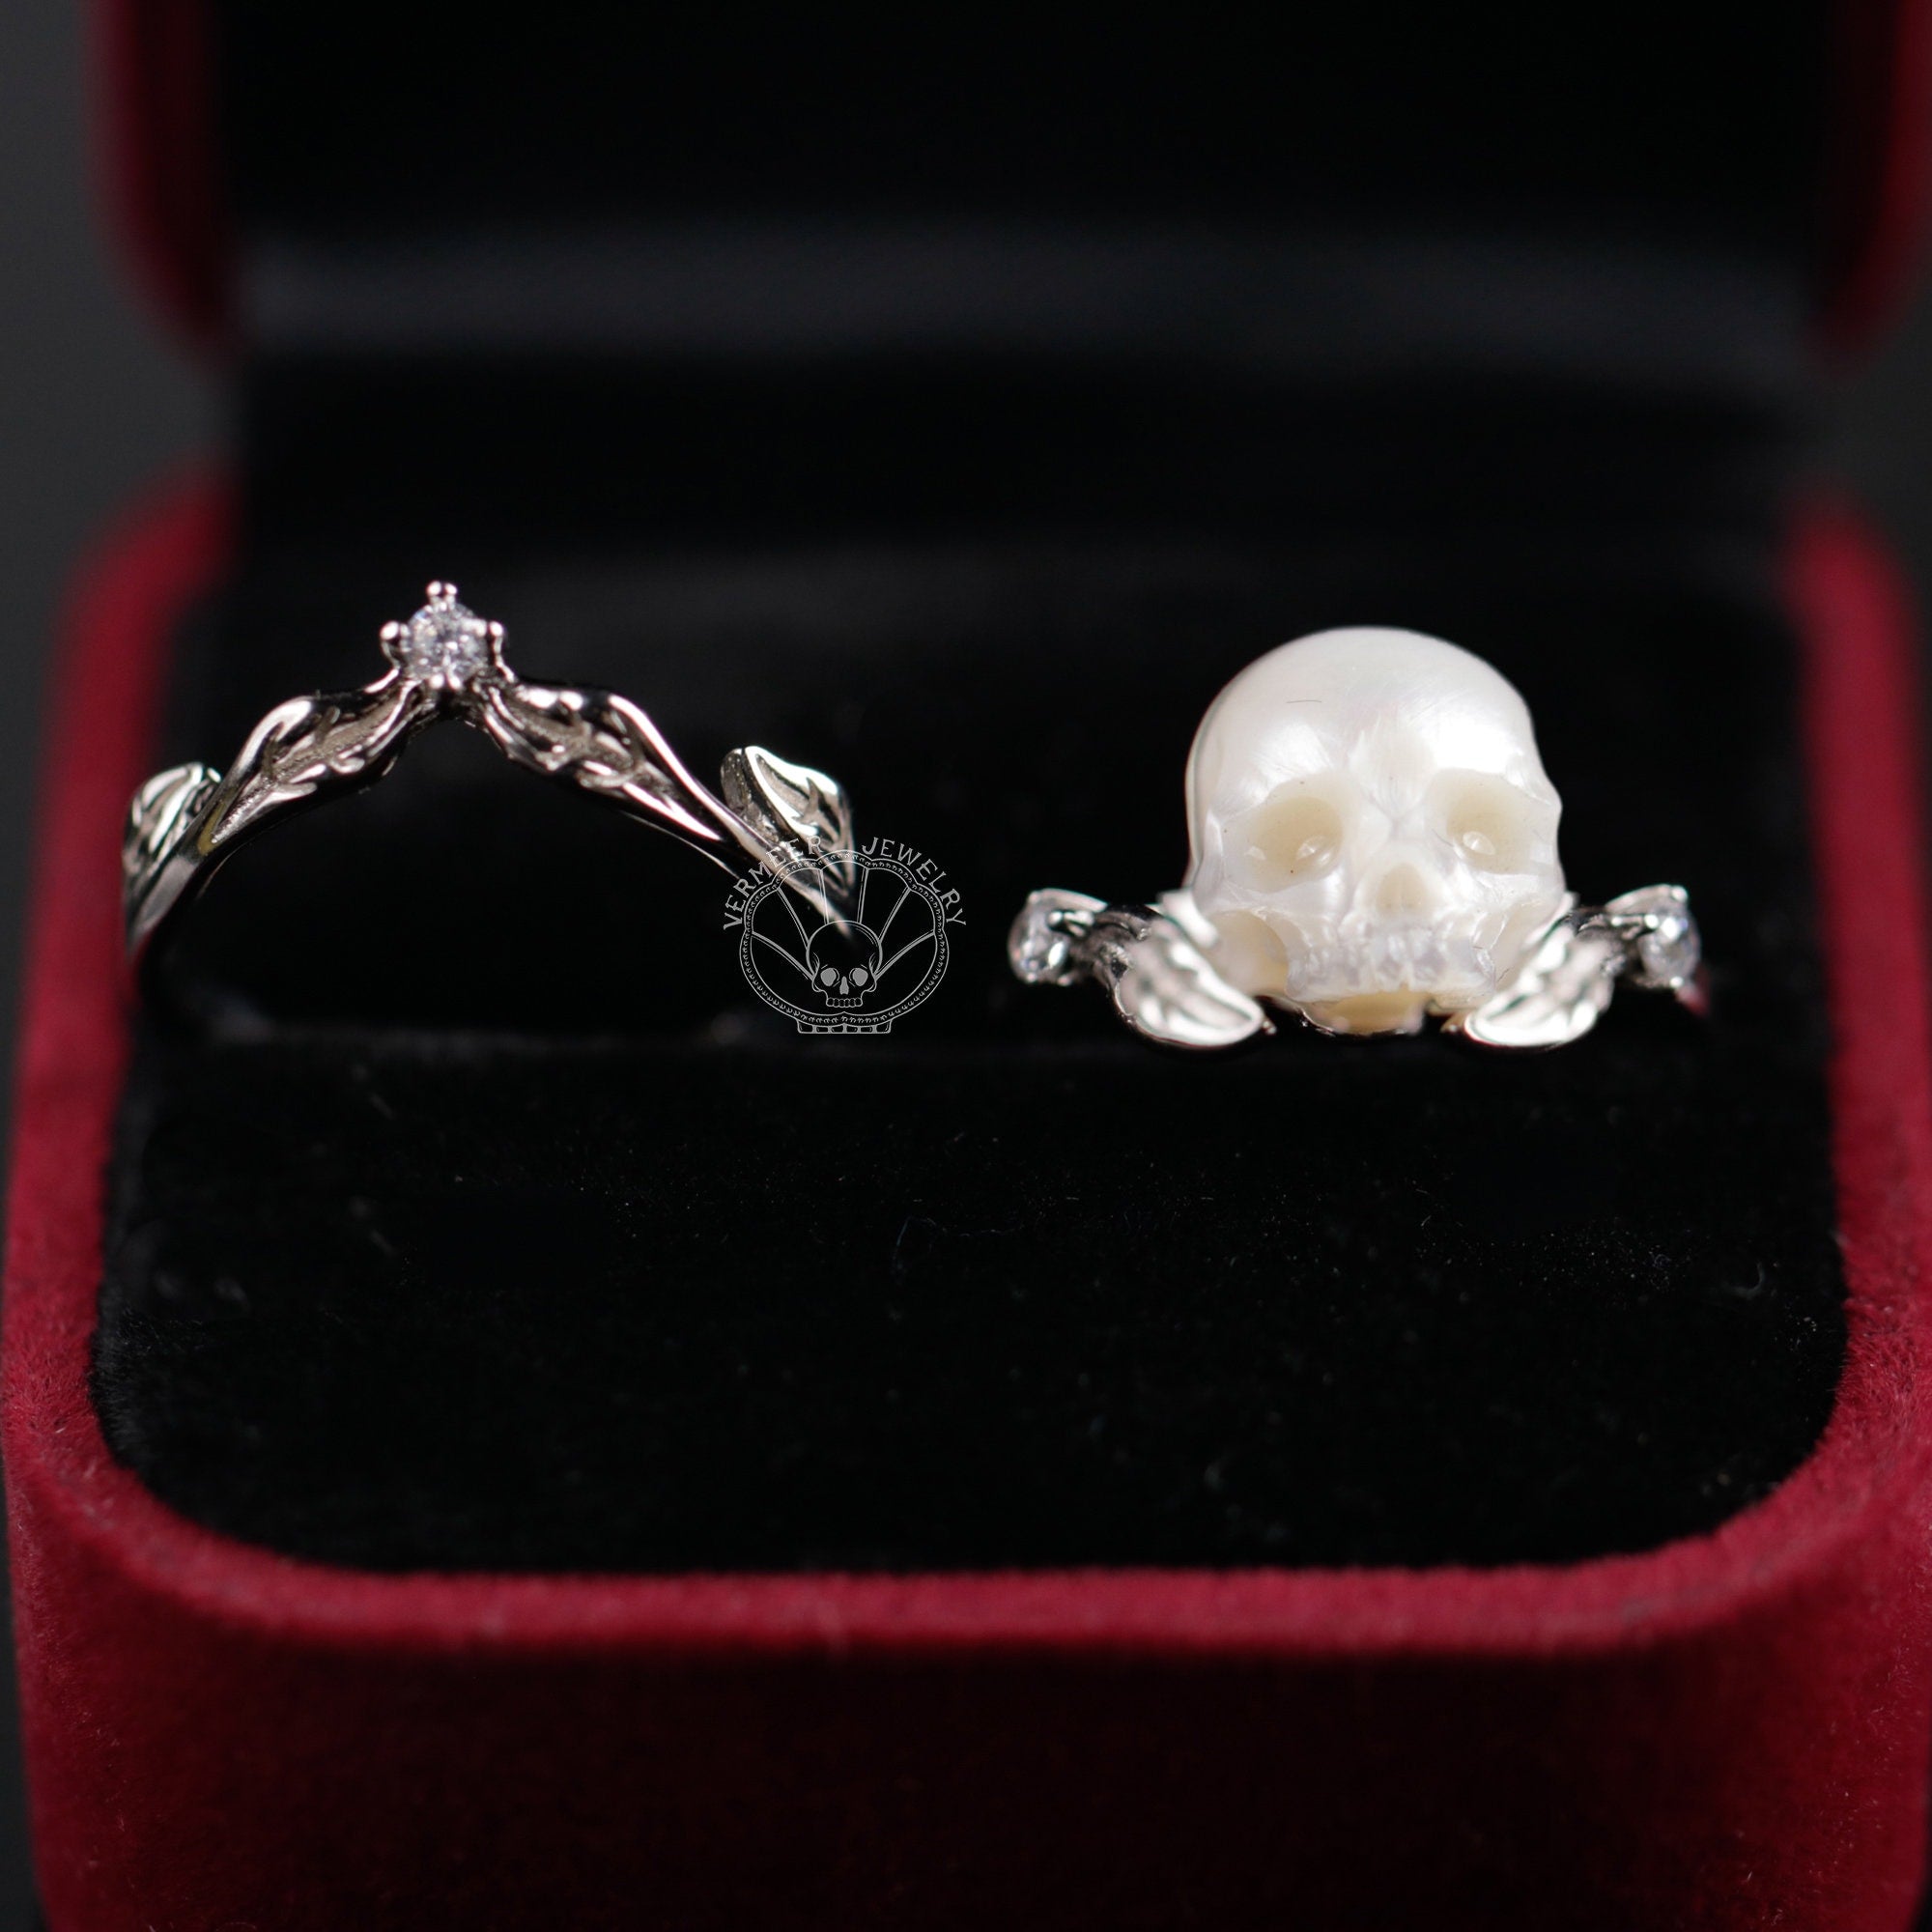 pearl skull ring ''elve of the forest'' stacking bands sterling silver rings gothic dark jewelry engagement ring for wedding